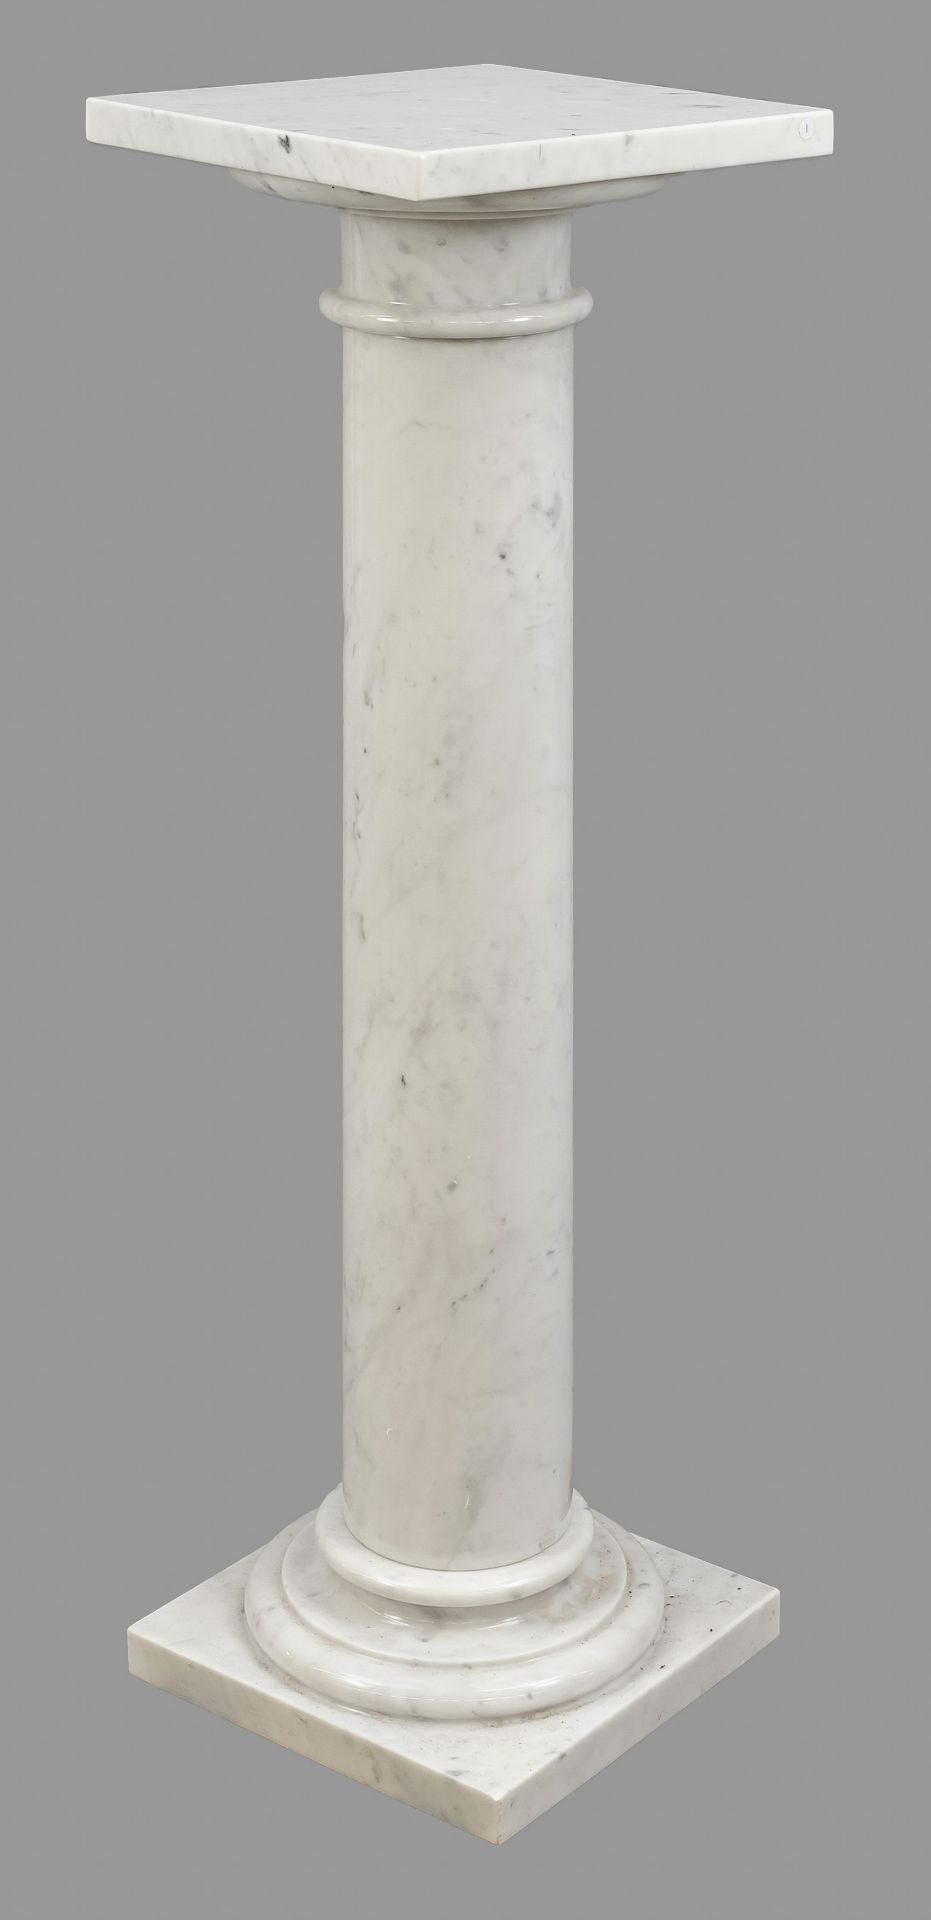 Flower column, 20th c., white, slightly veined marble, classical form with square top plate,